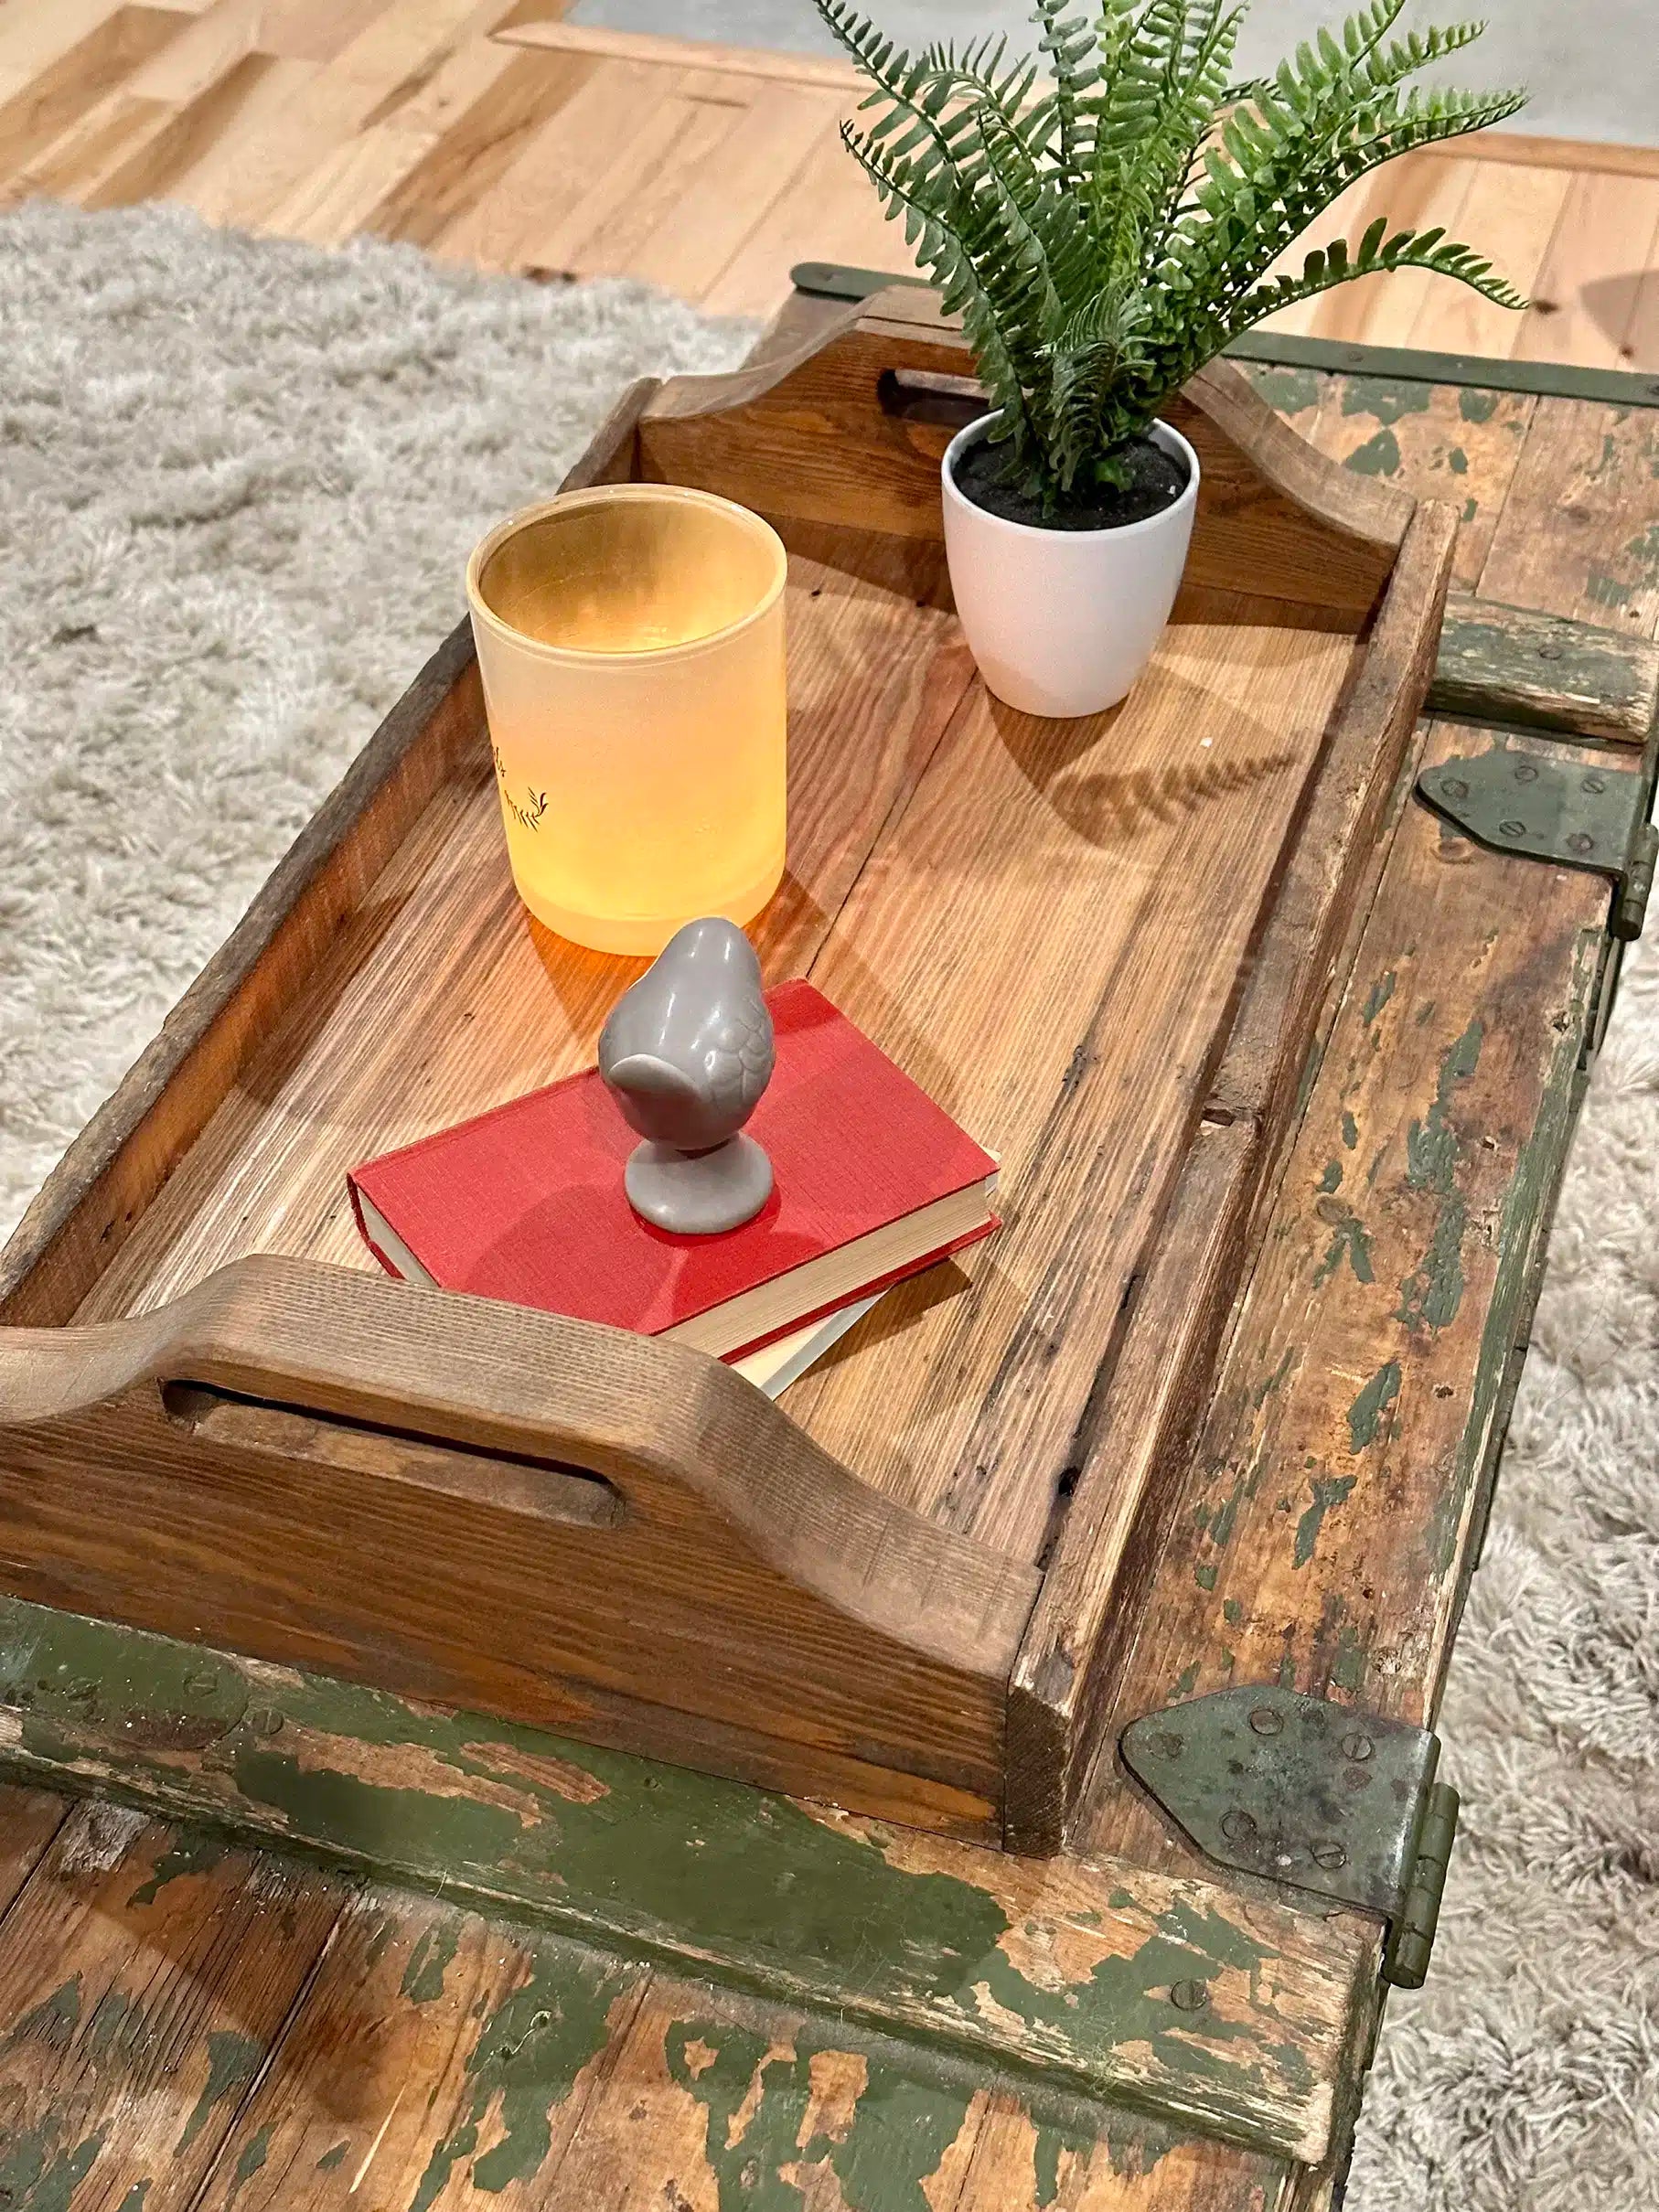 Handcrafted Reclaimed Wood Serving Tray: Sustainable and Stylish